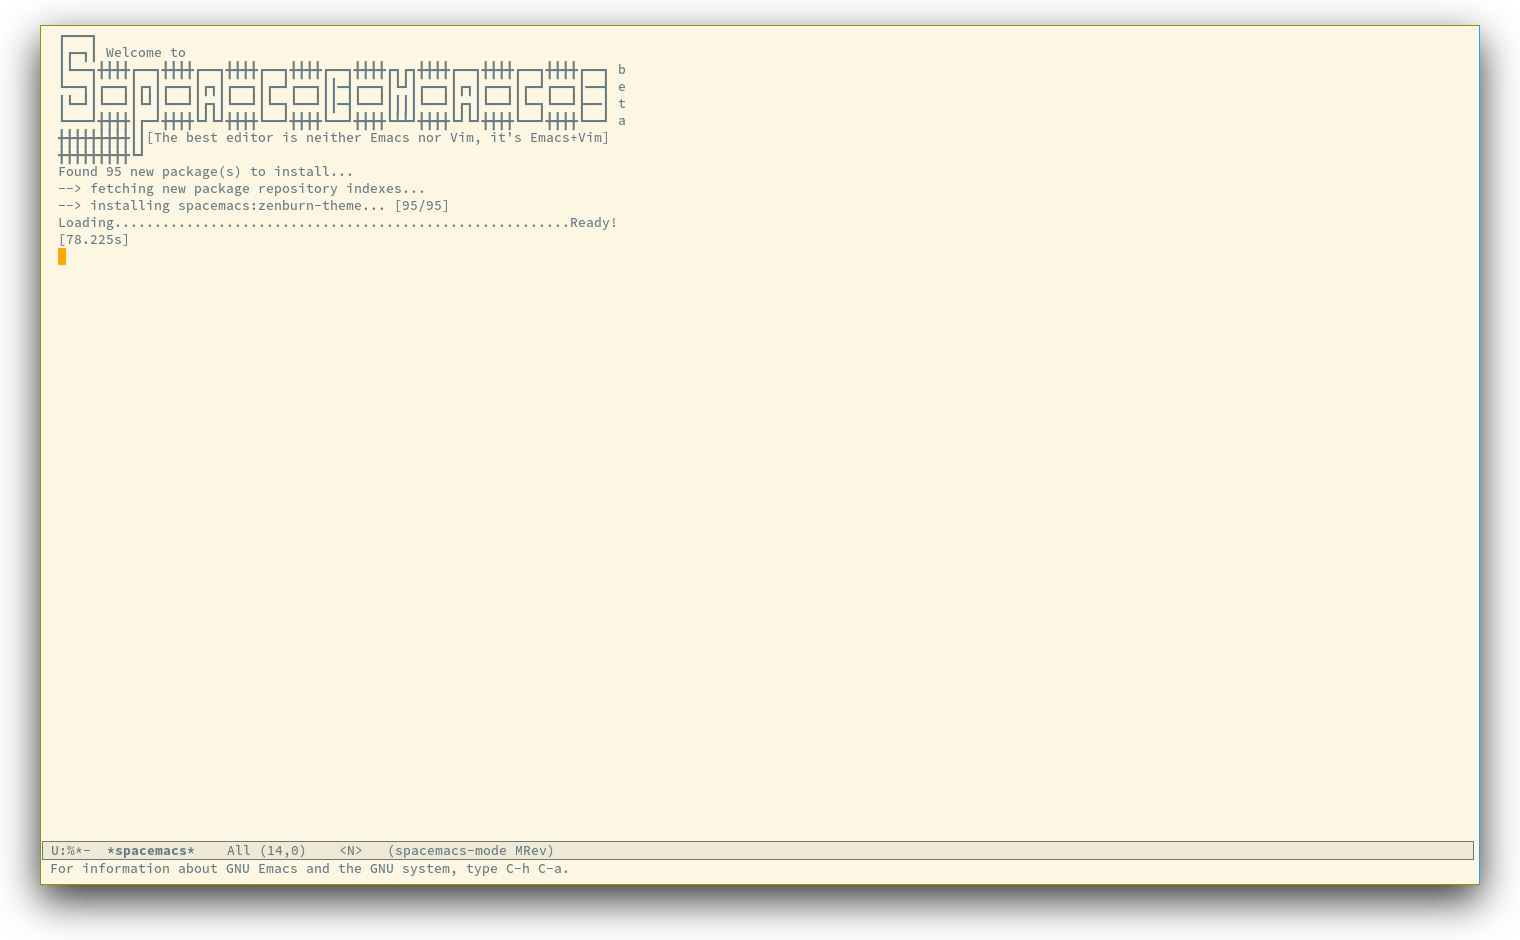 /TakeV/spacemacs/media/commit/d17c229c2ac22c045638902fb0ee63b31c0c4233/doc/img/spacemacs-startup.png